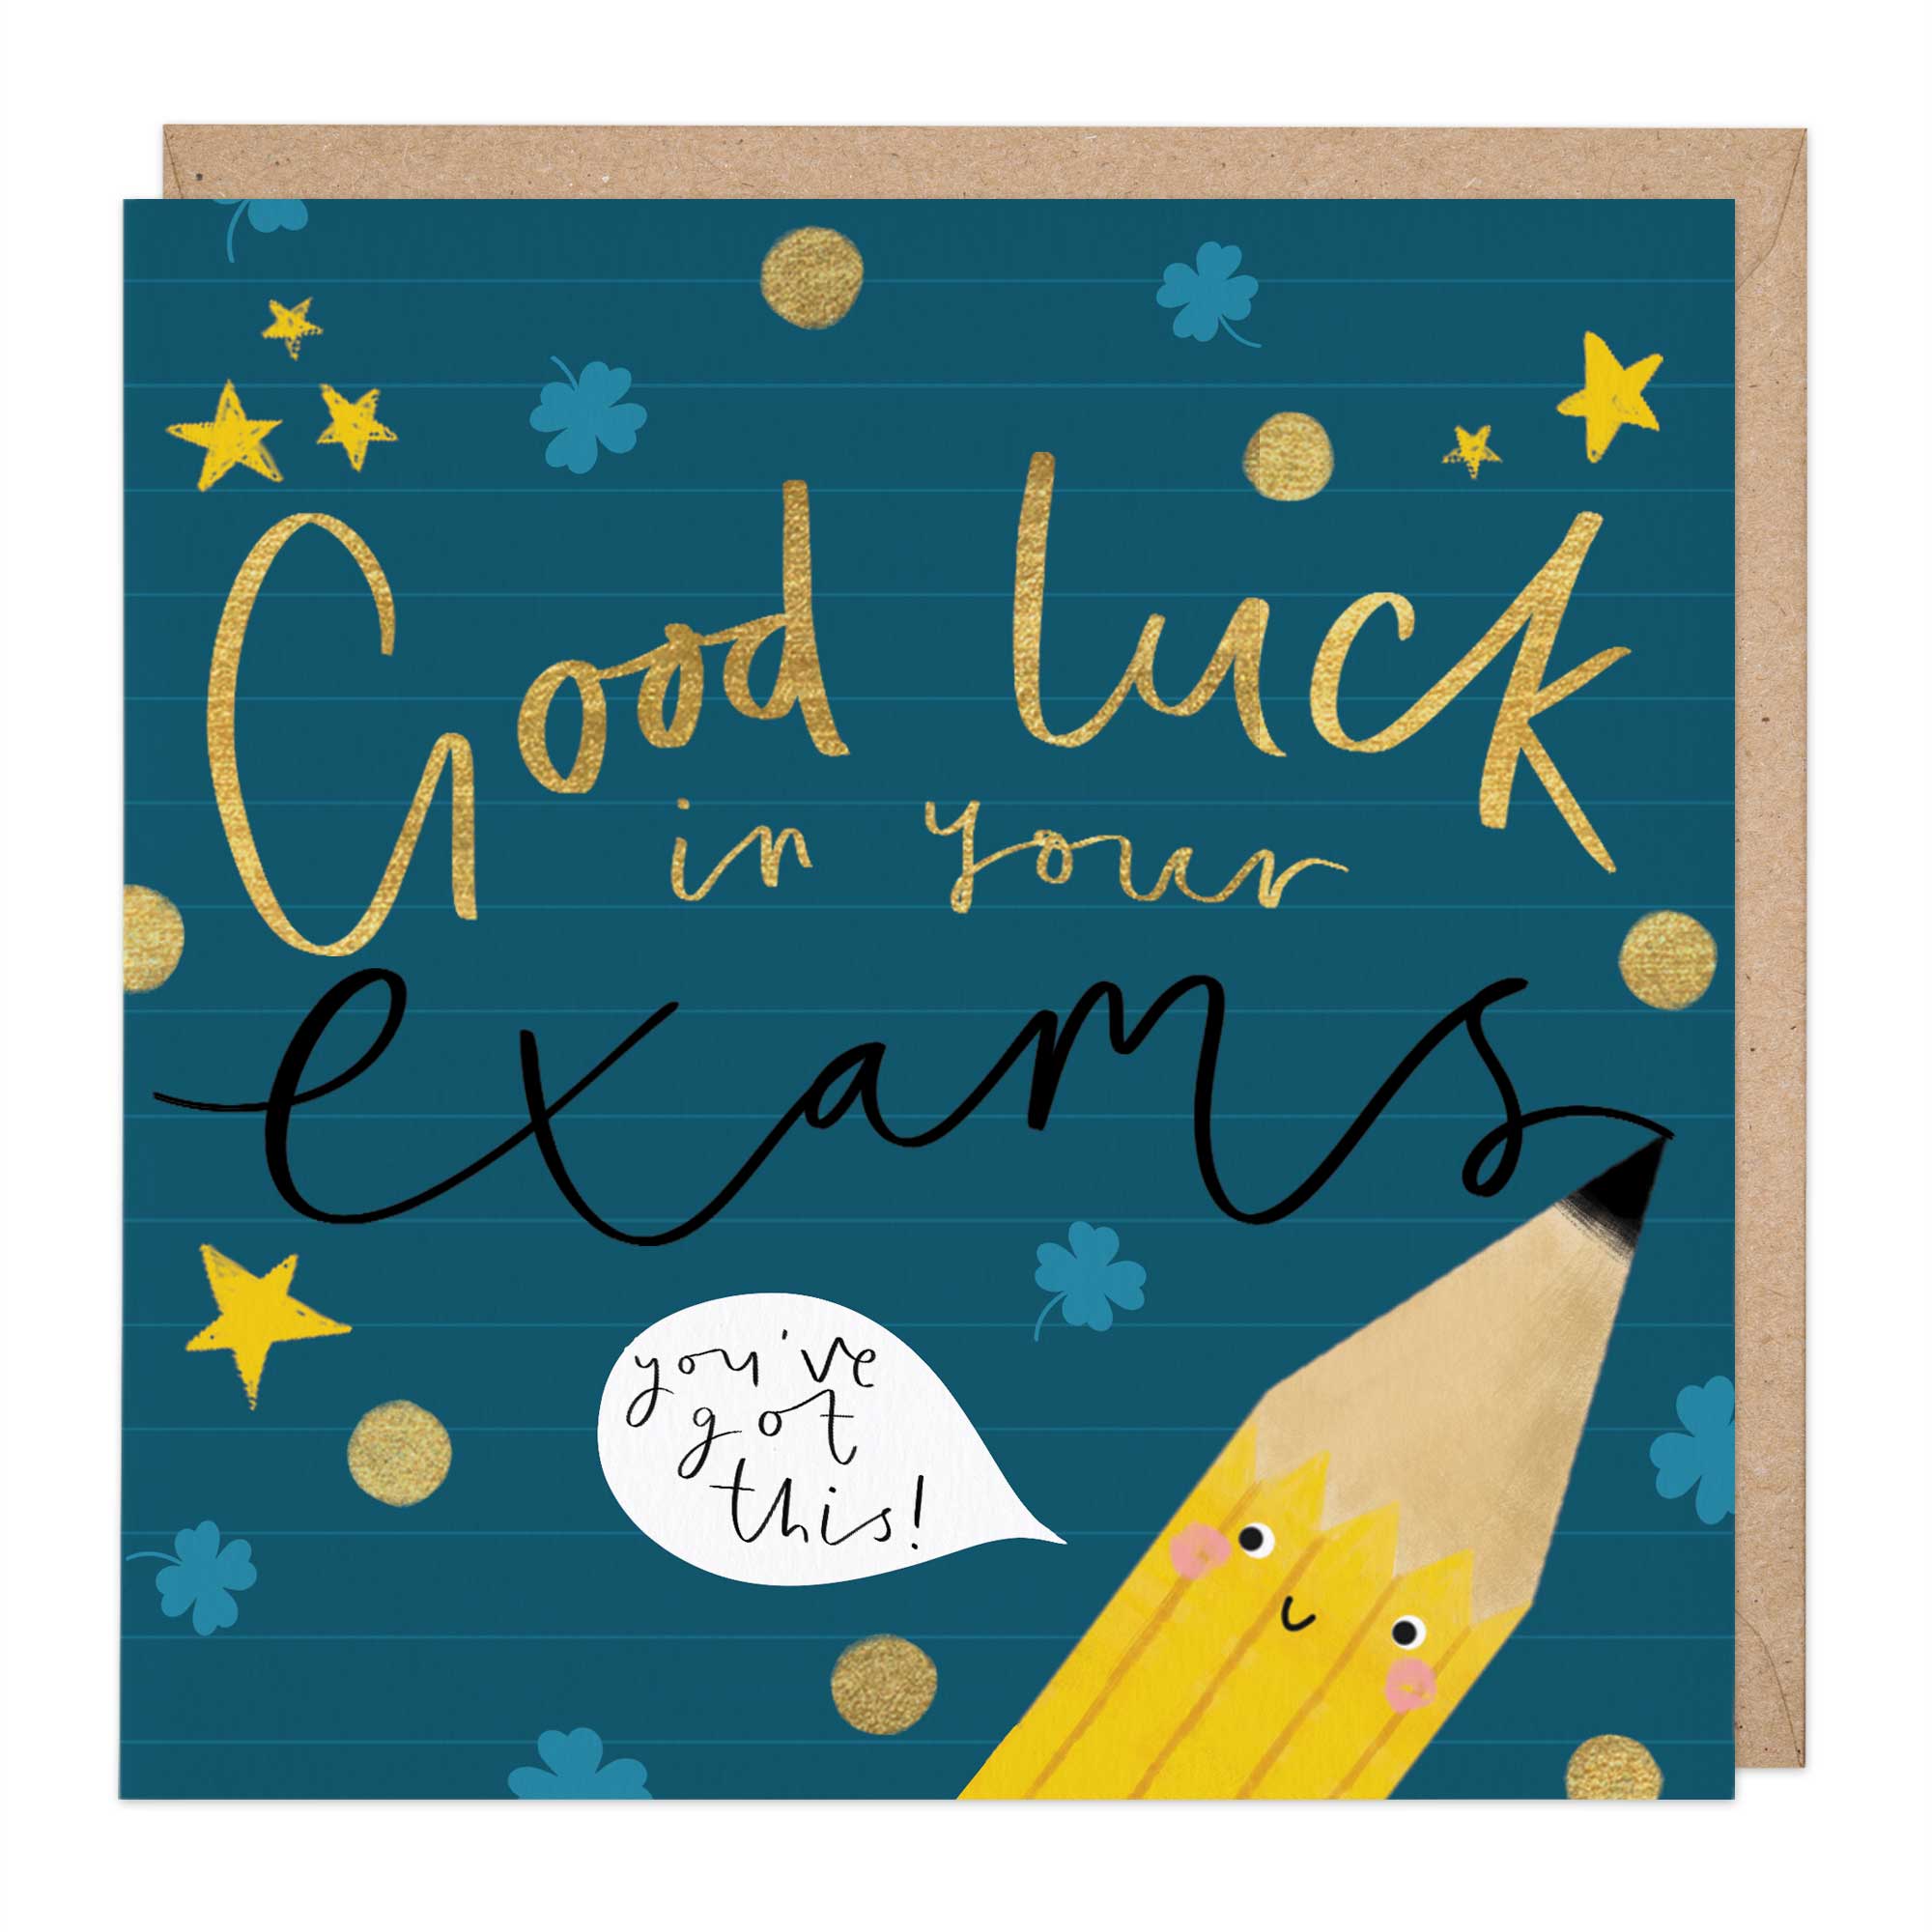 Good Luck In Your Exams Card